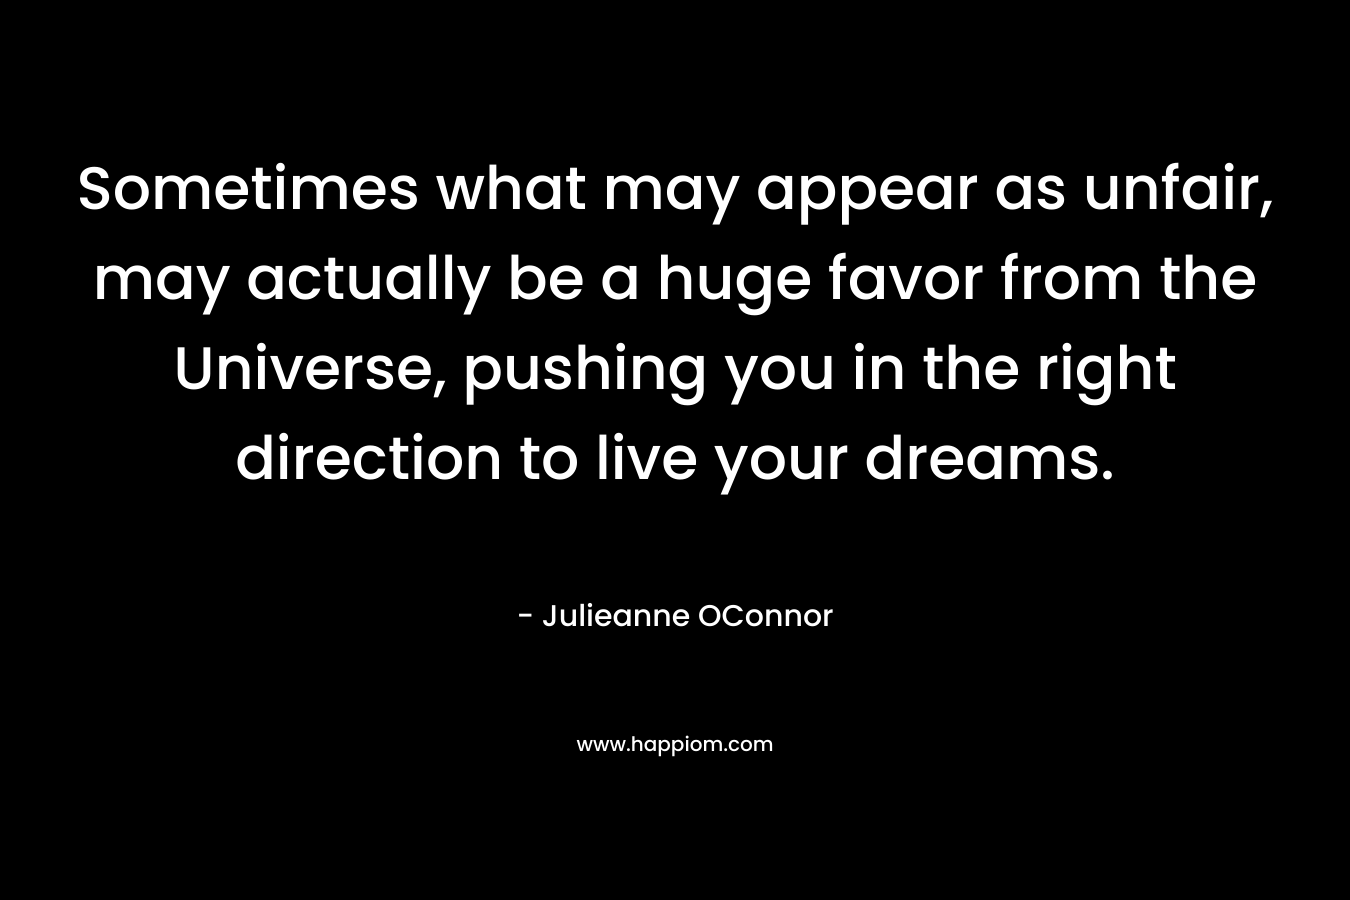 Sometimes what may appear as unfair, may actually be a huge favor from the Universe, pushing you in the right direction to live your dreams.